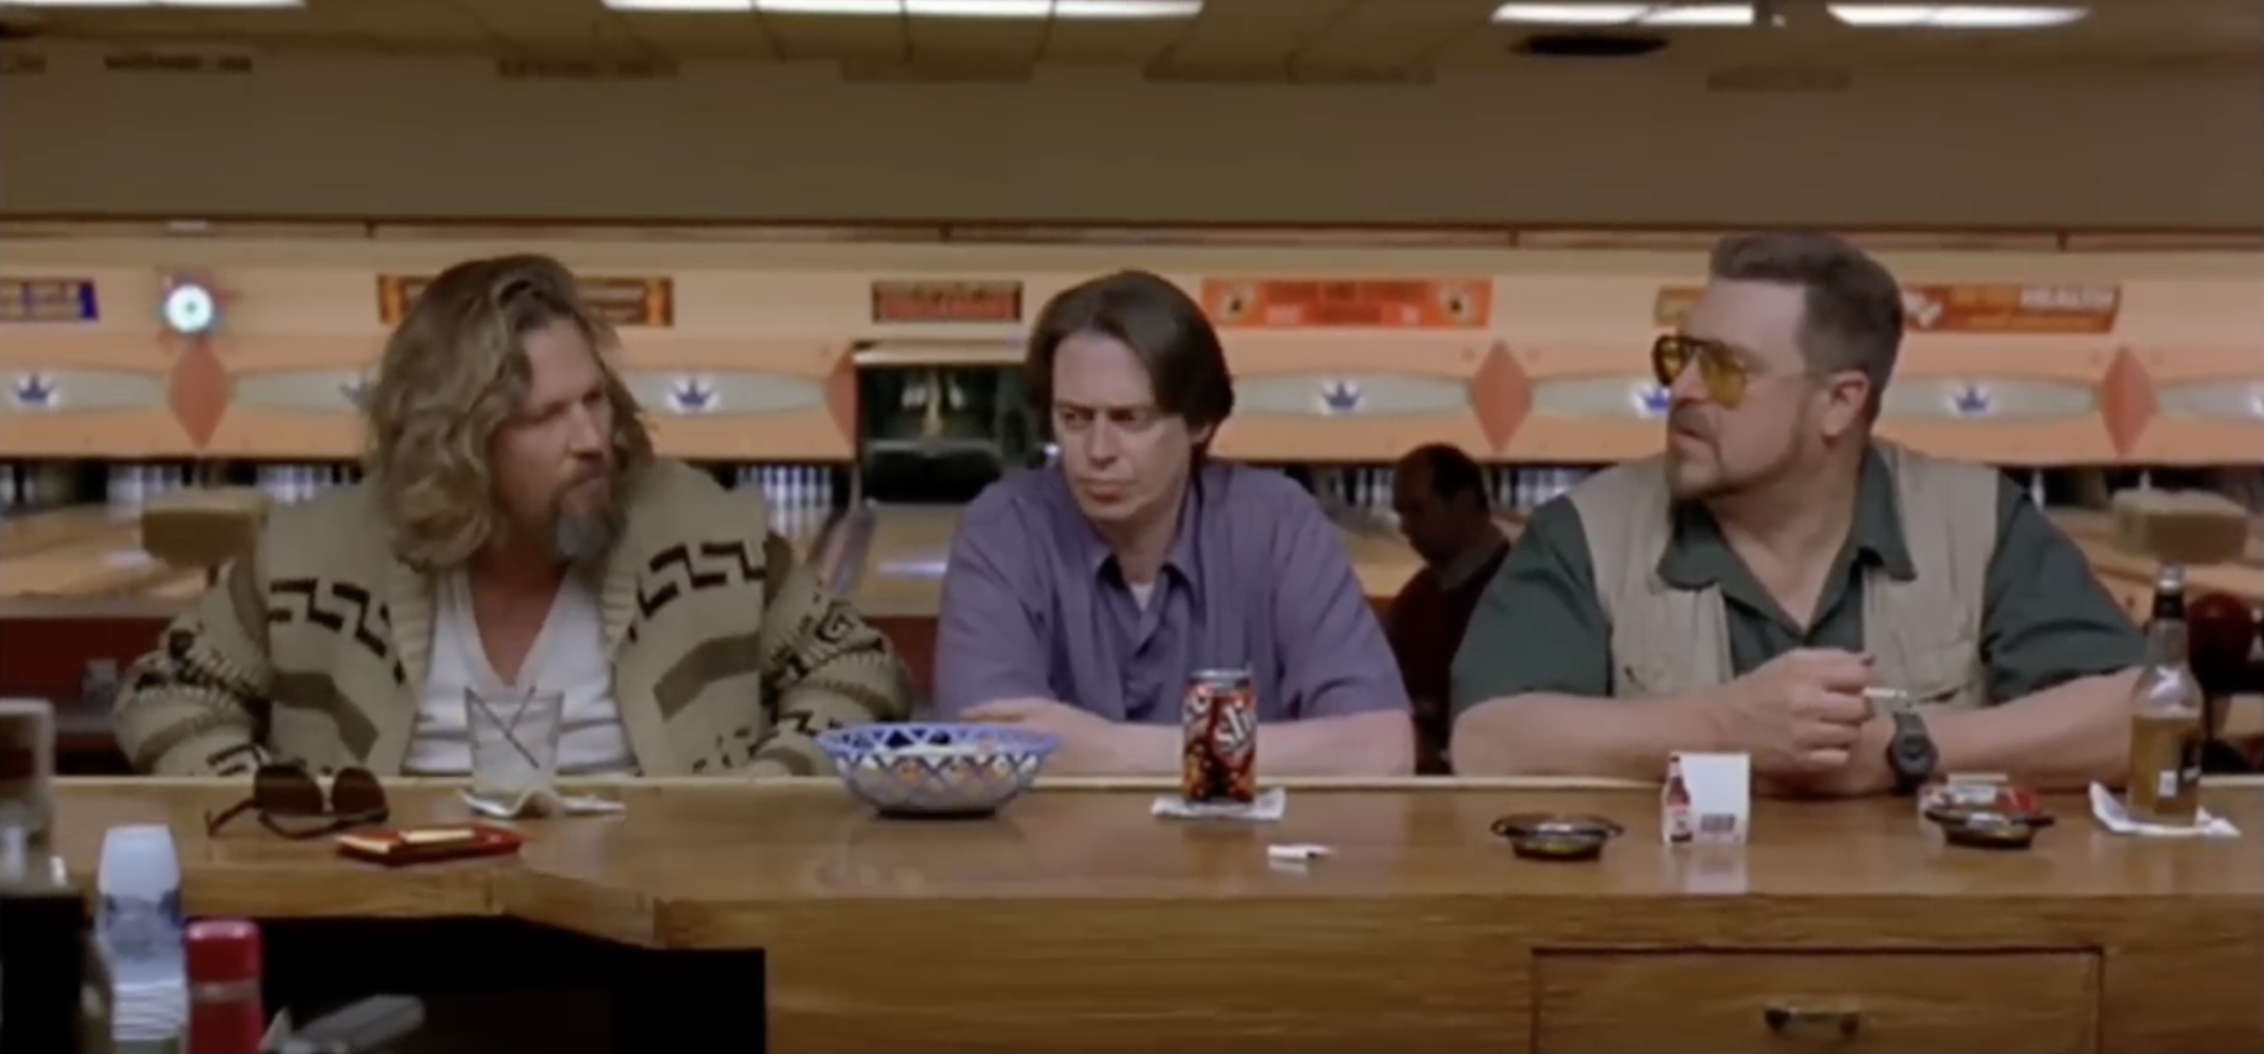 High Quality Big Lebowski OK Dude I Can See You Don't Want to be Cheered Up Blank Meme Template